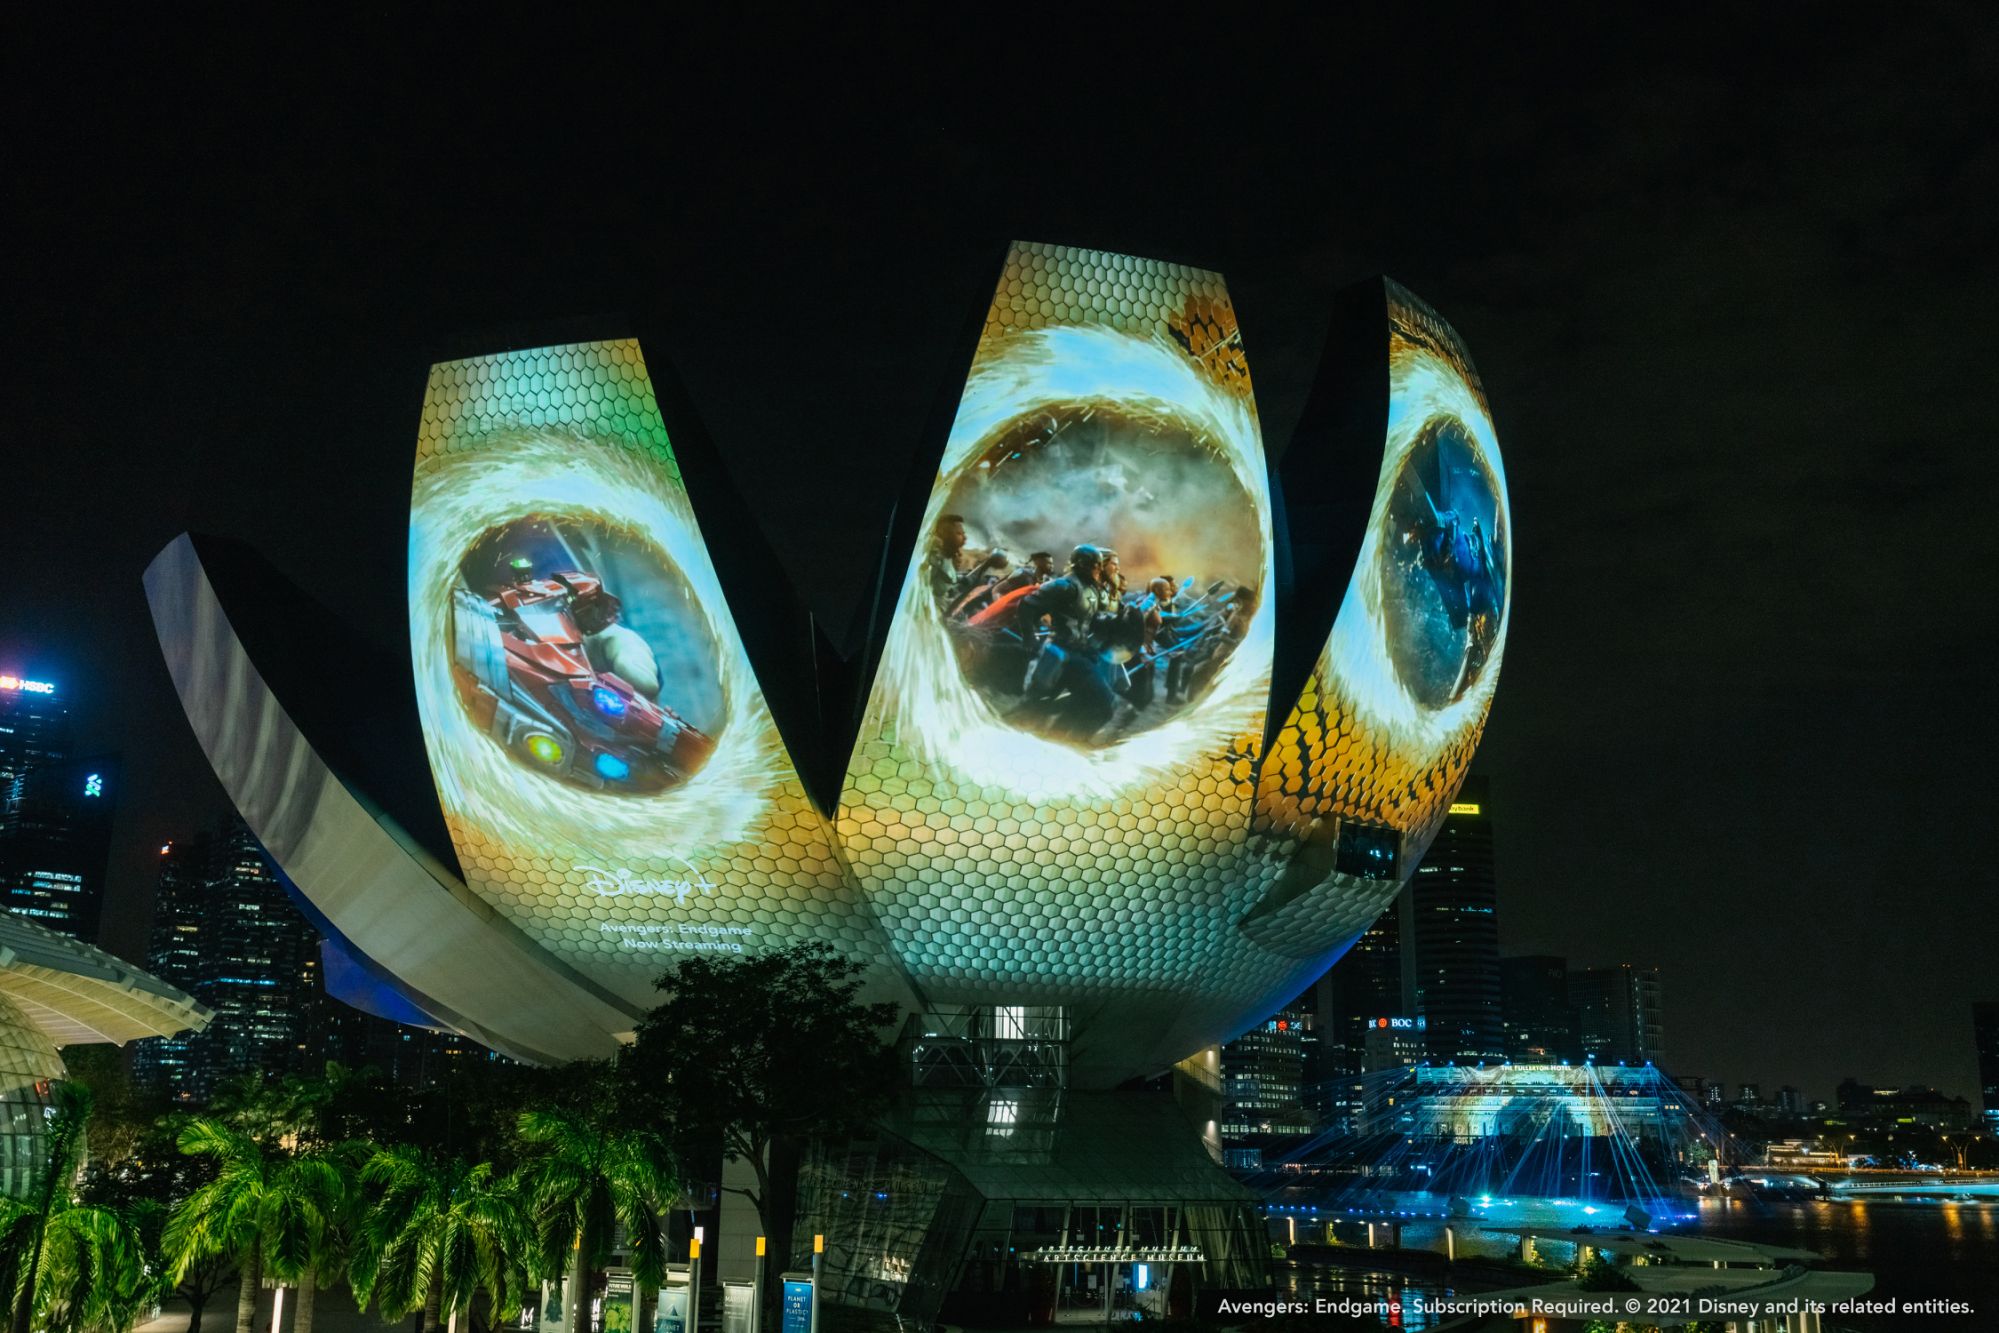 Disney characters take over Singapore landmarks with an electrifying light show